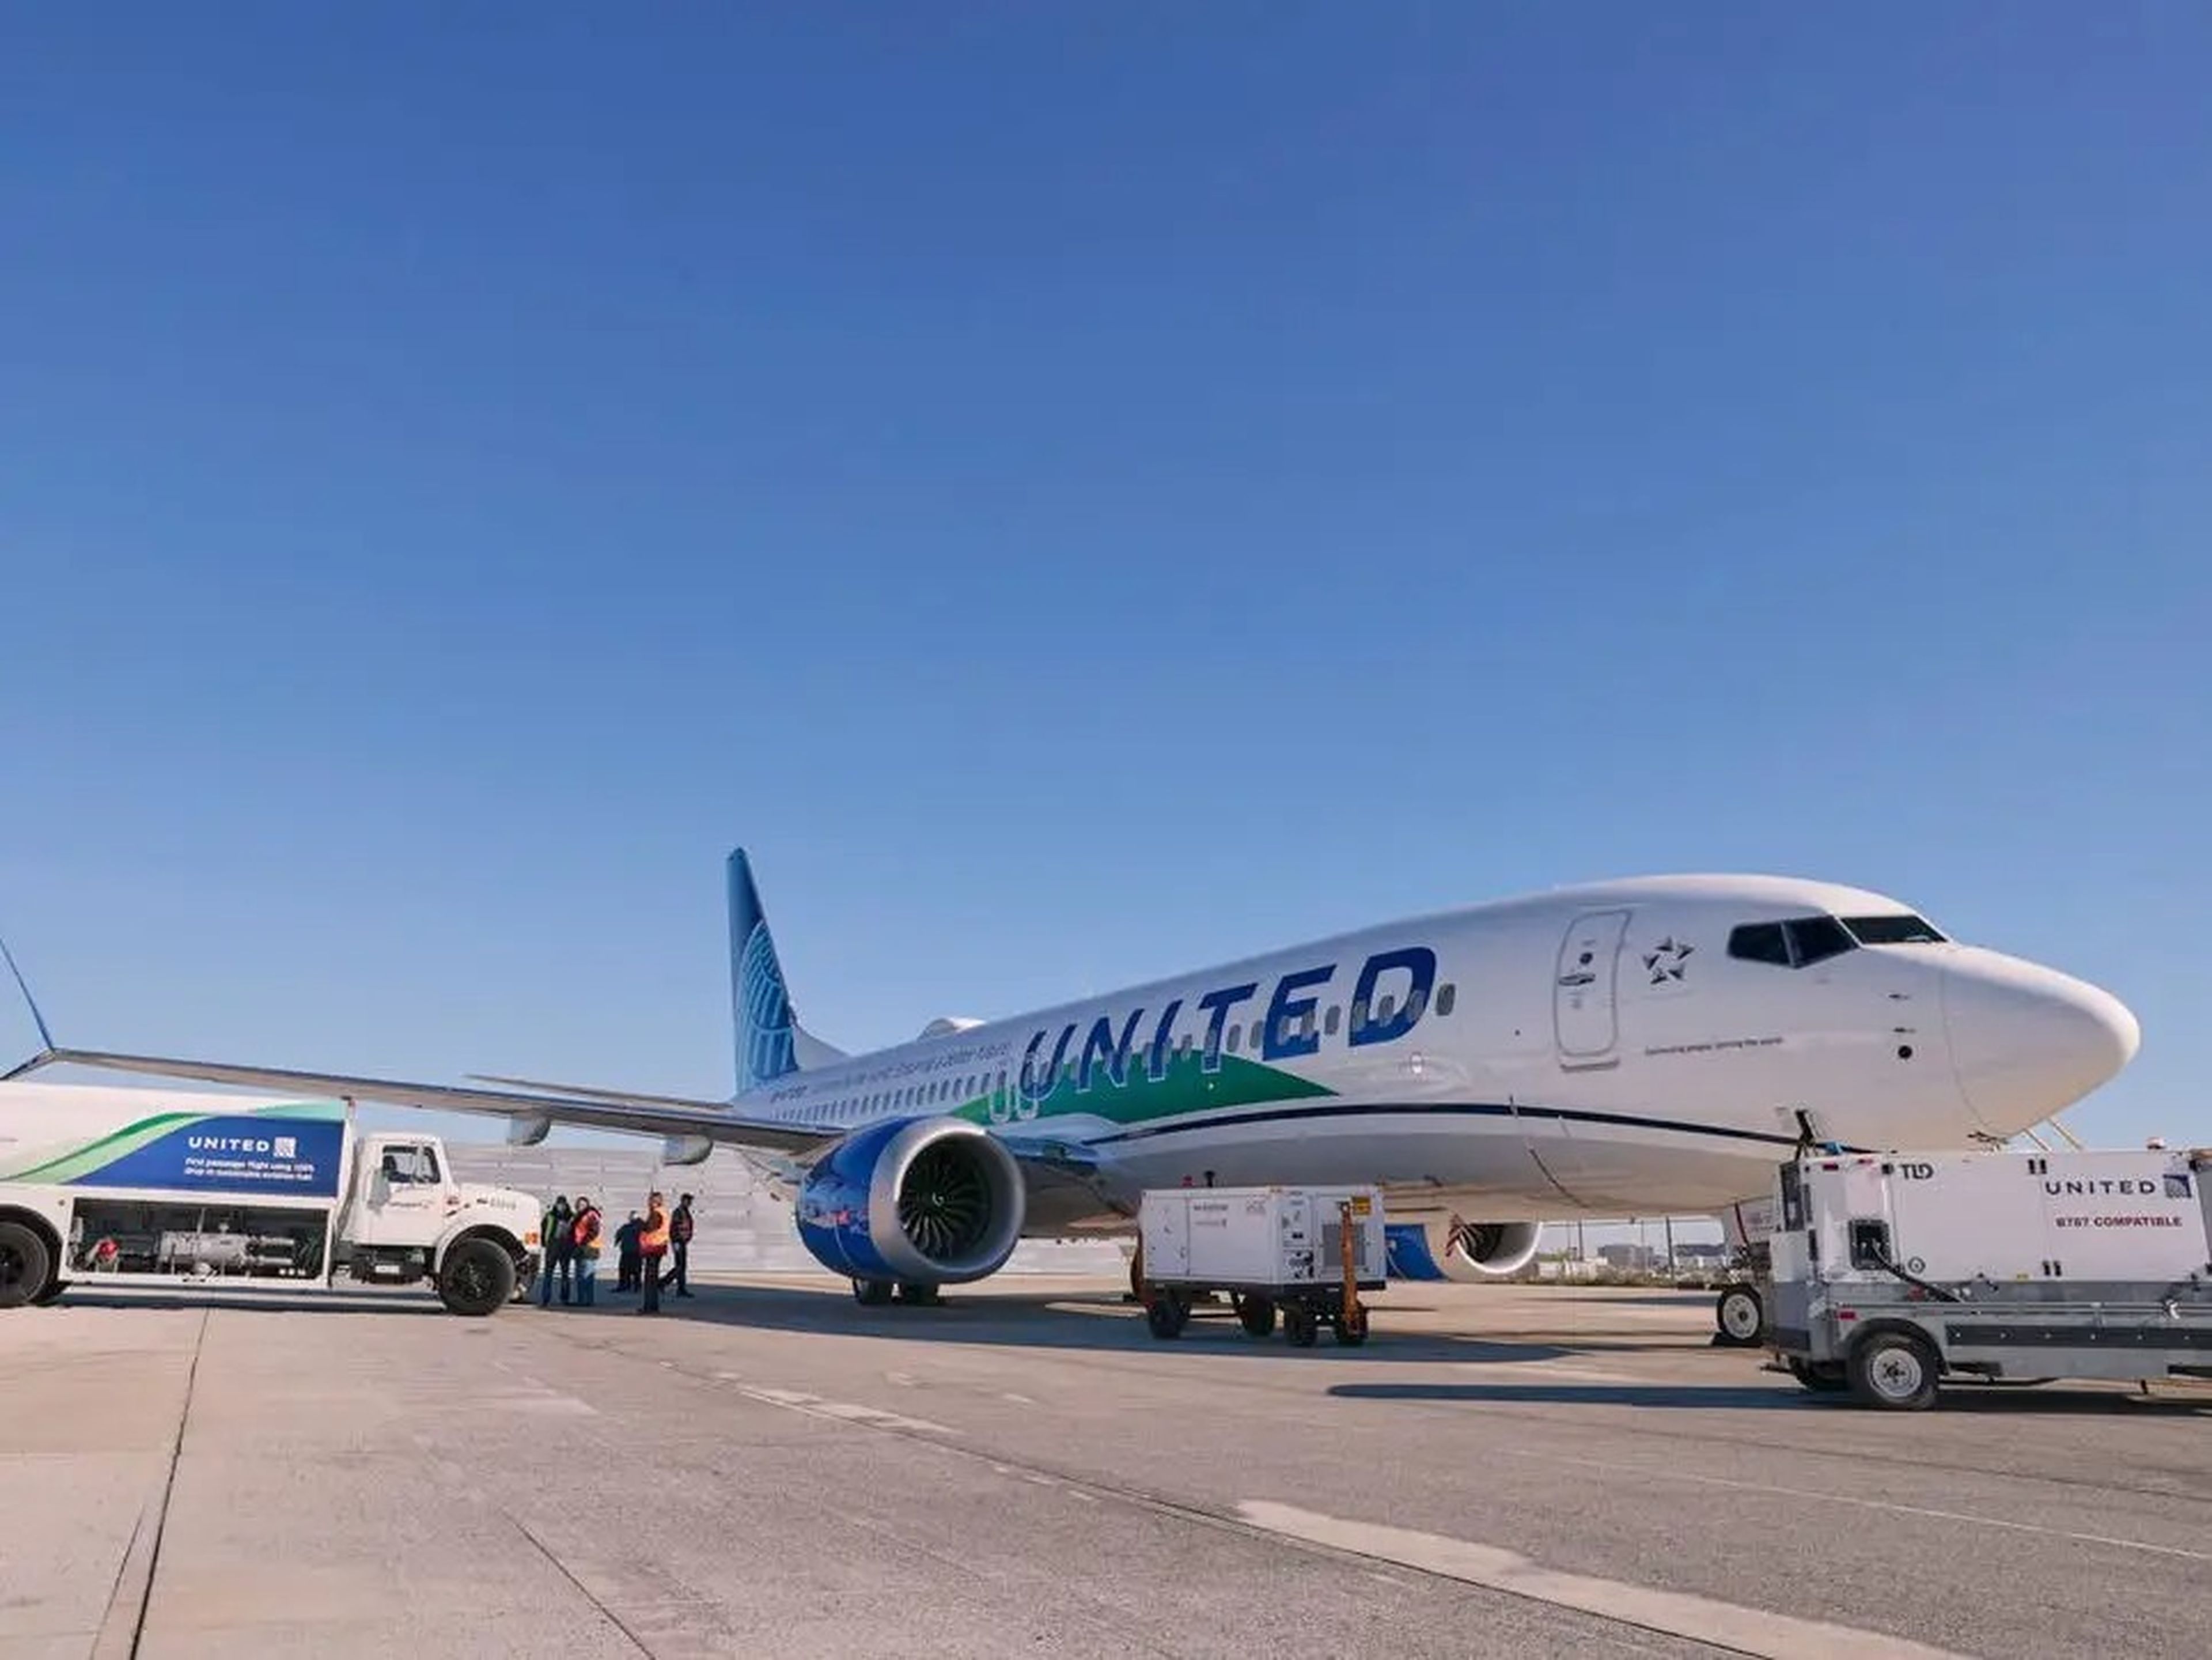 United Airlines is the first airline in the world to use 100% SAF on a passenger flight.